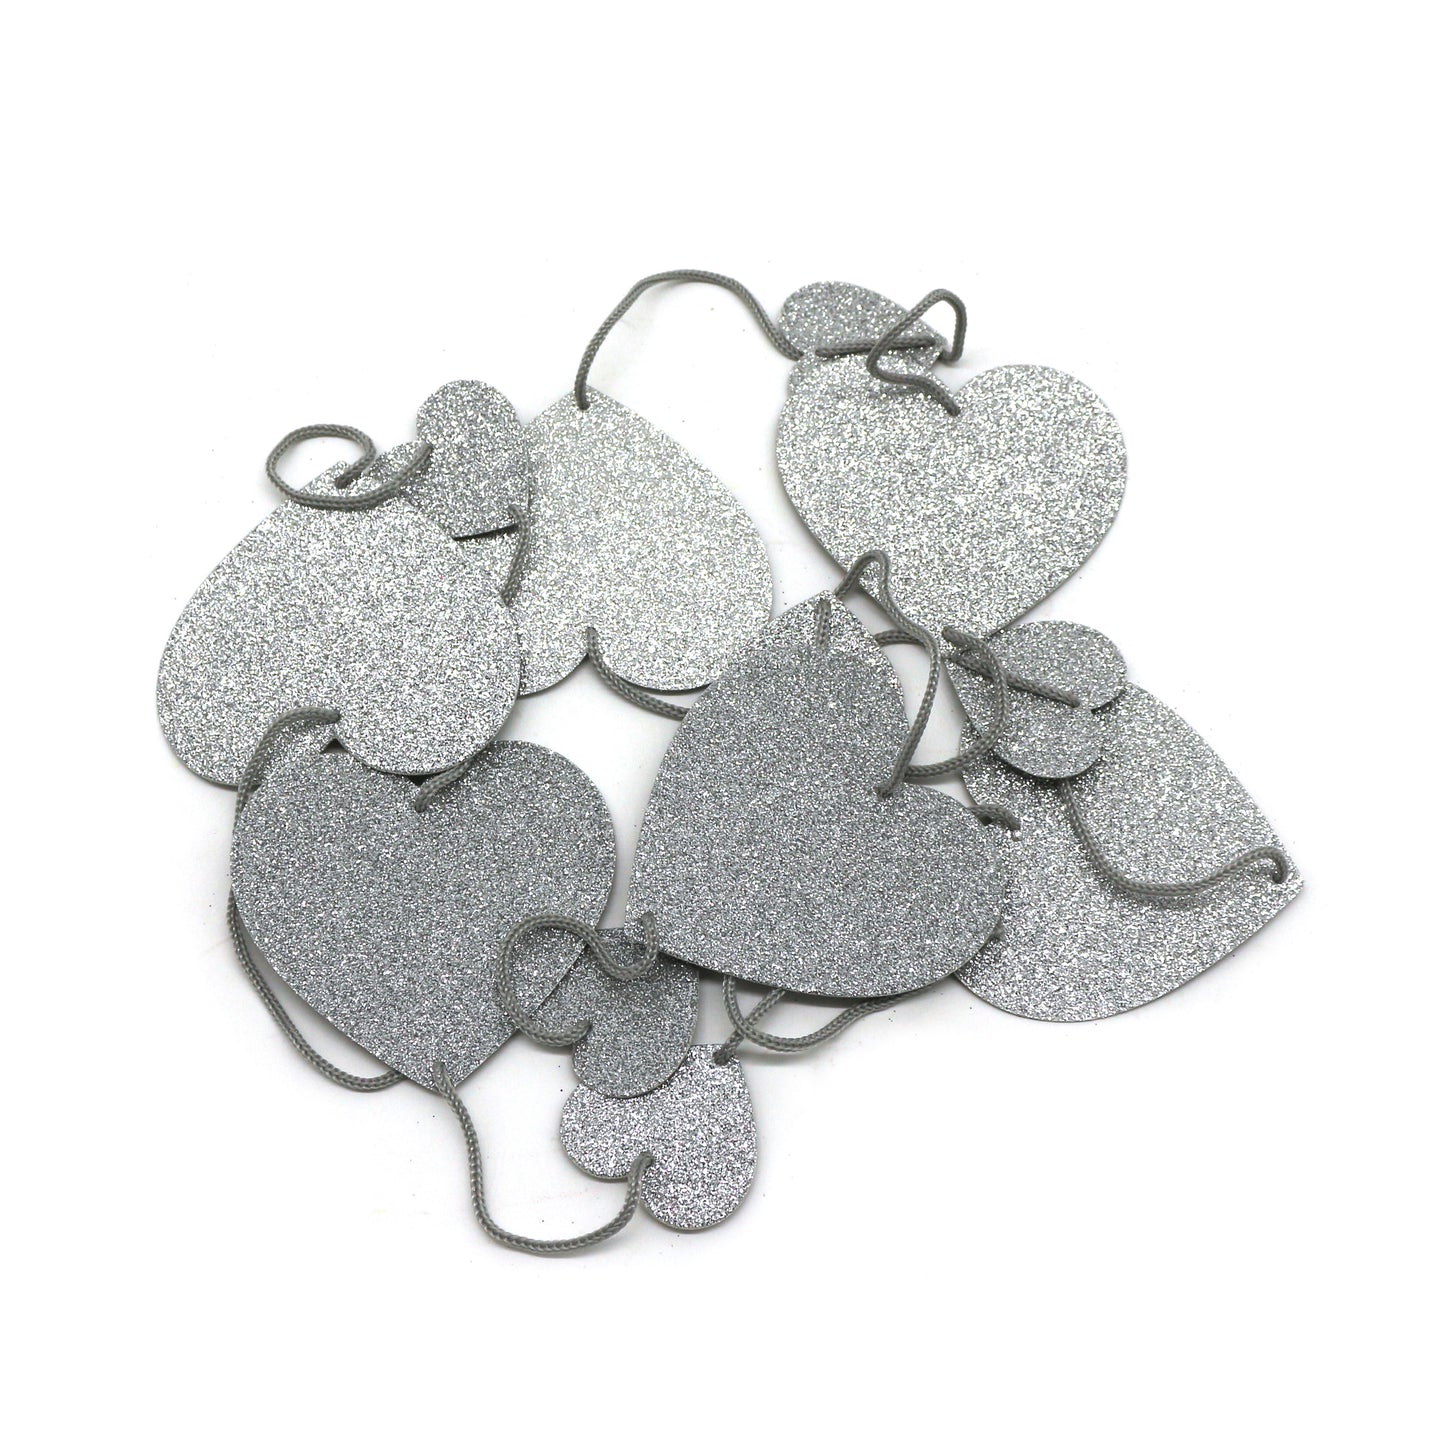 CVHOMEDECO. Twinkle Glittered Paper Heart Shape String Garland Unique Hanging Bunting Banner for Wedding Birthday Party Festival Home Background Decoration, 5.5 feet, Pack of 2 PCS (Silver)